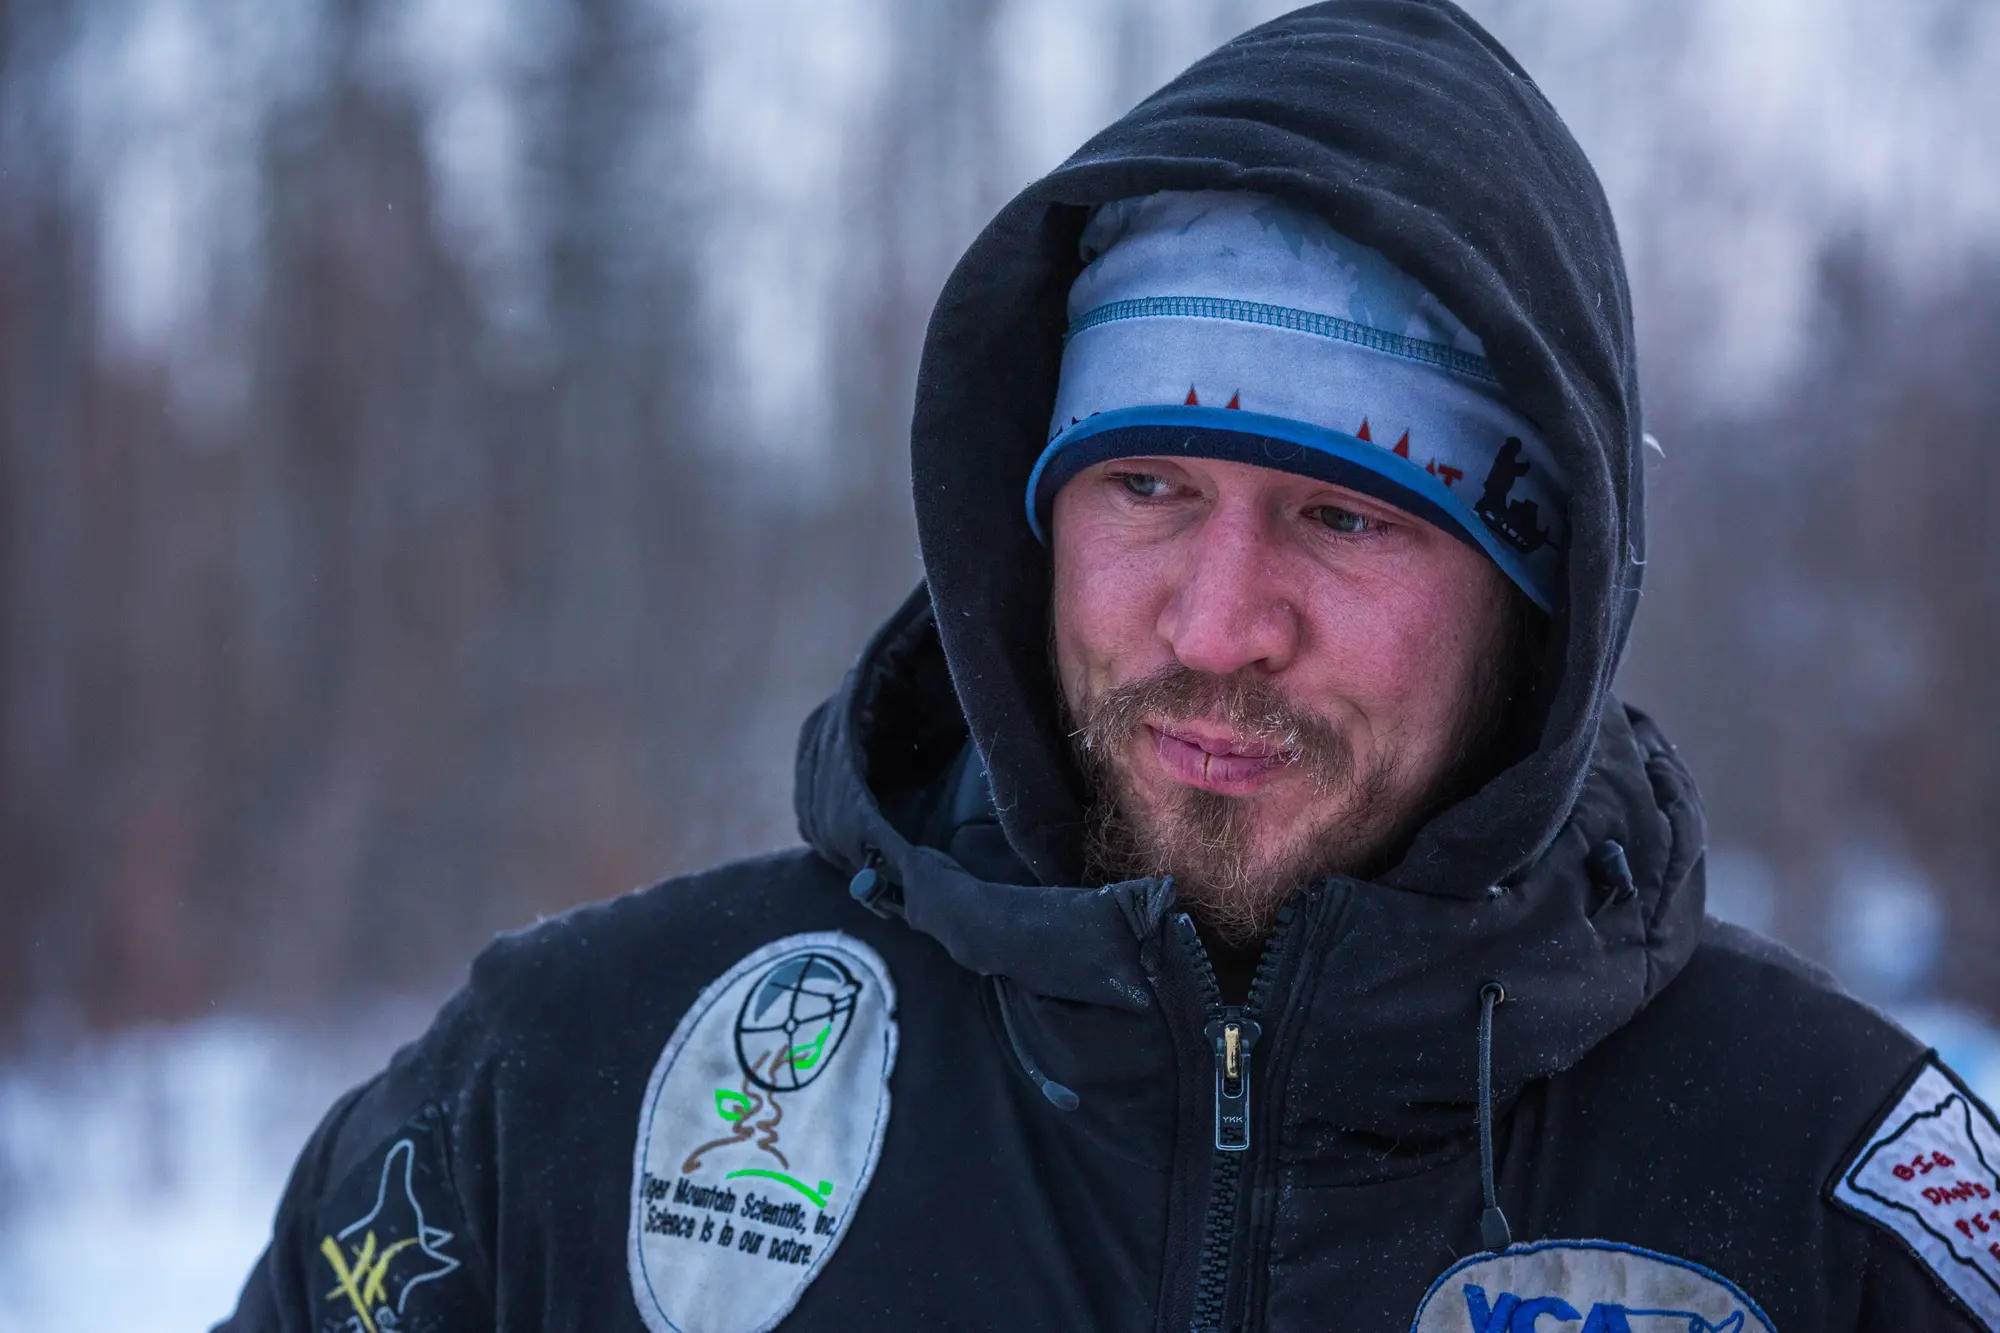 Iditarod Disqualifies Former Champion After Sexual Assault Allegations (propublica.org)